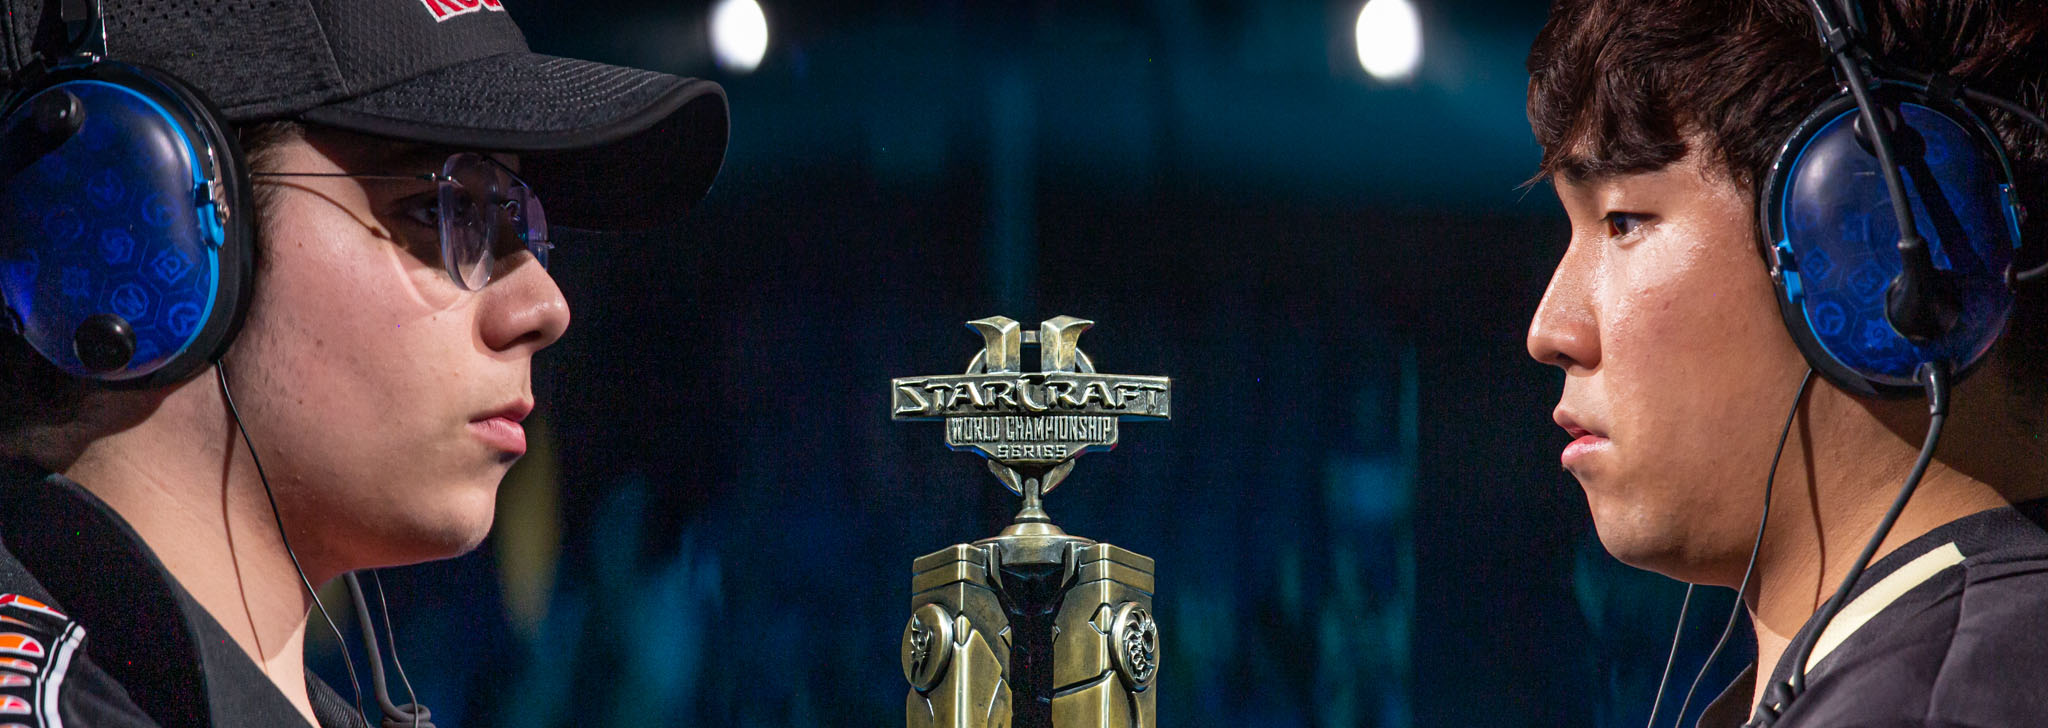 Congrats to the StarCraft II WCS Global Finals Champion!